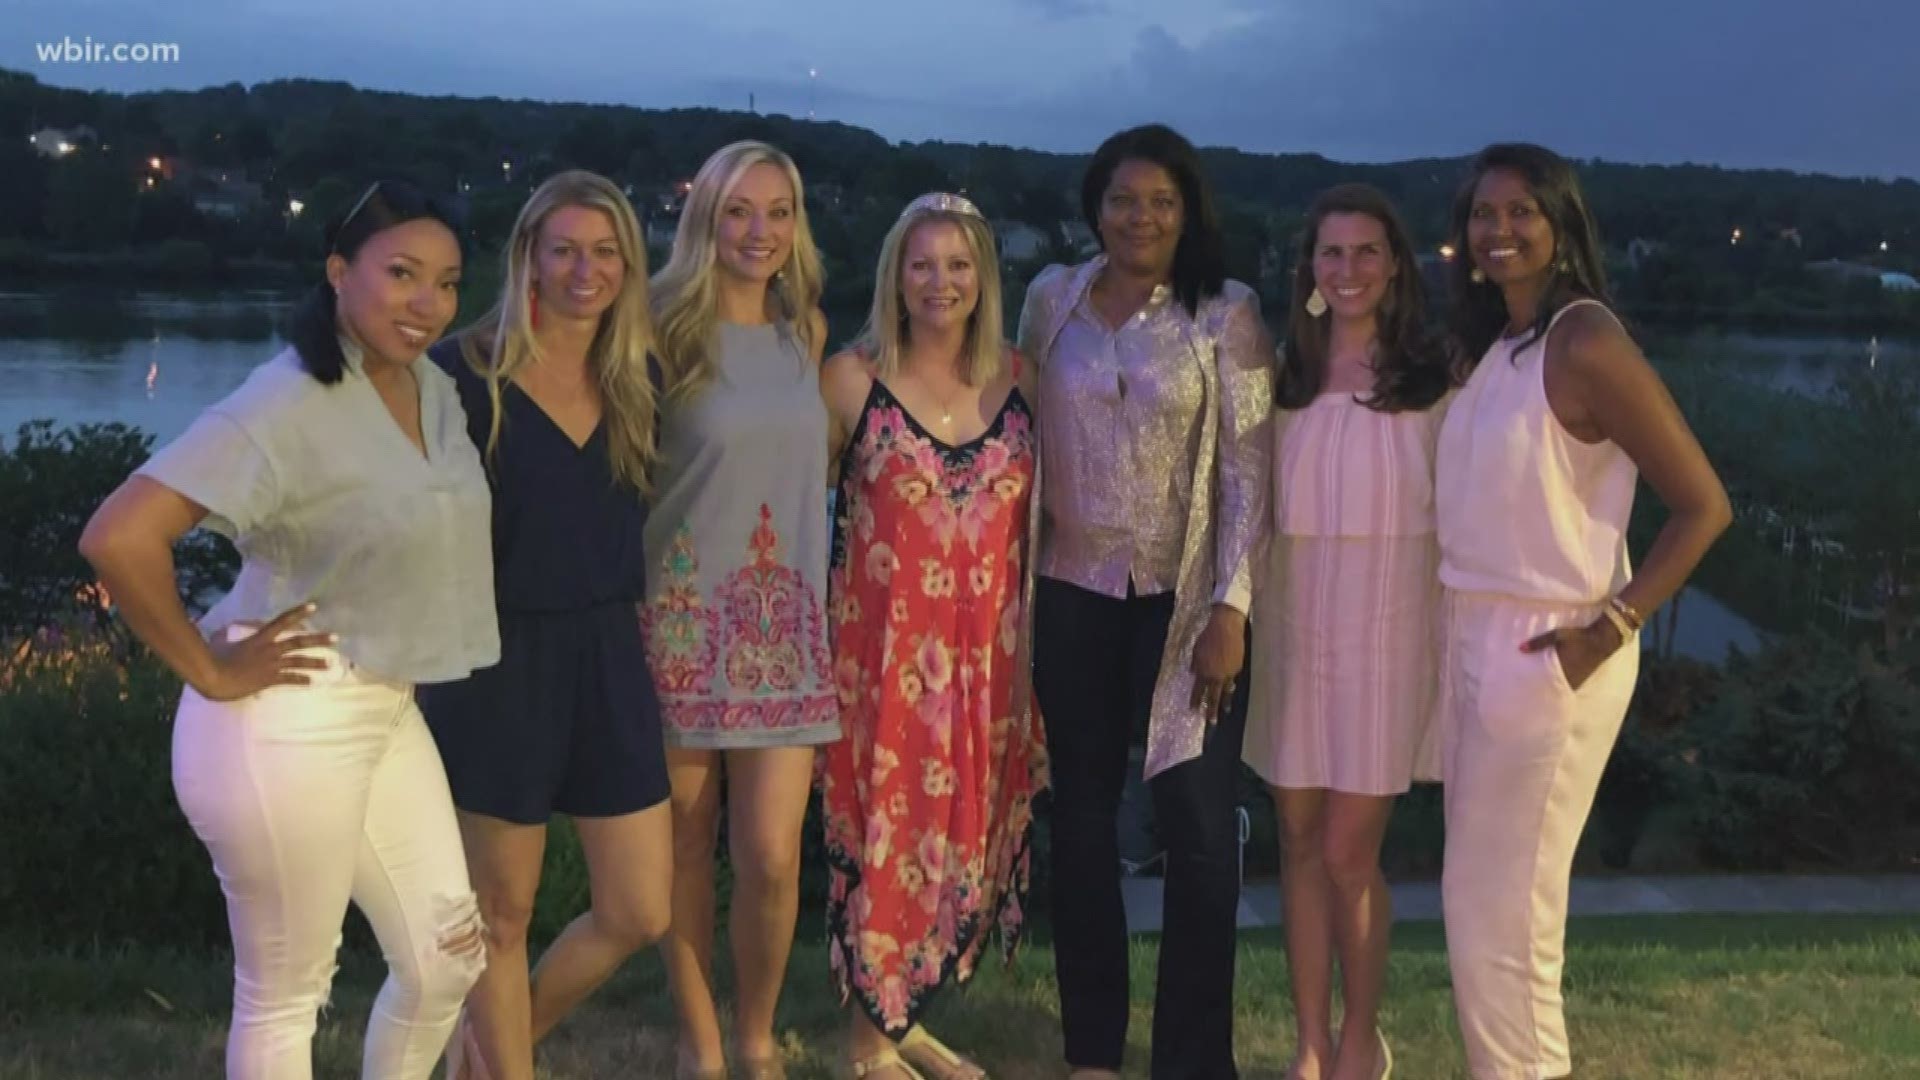 The wives of UT Football's coaches 